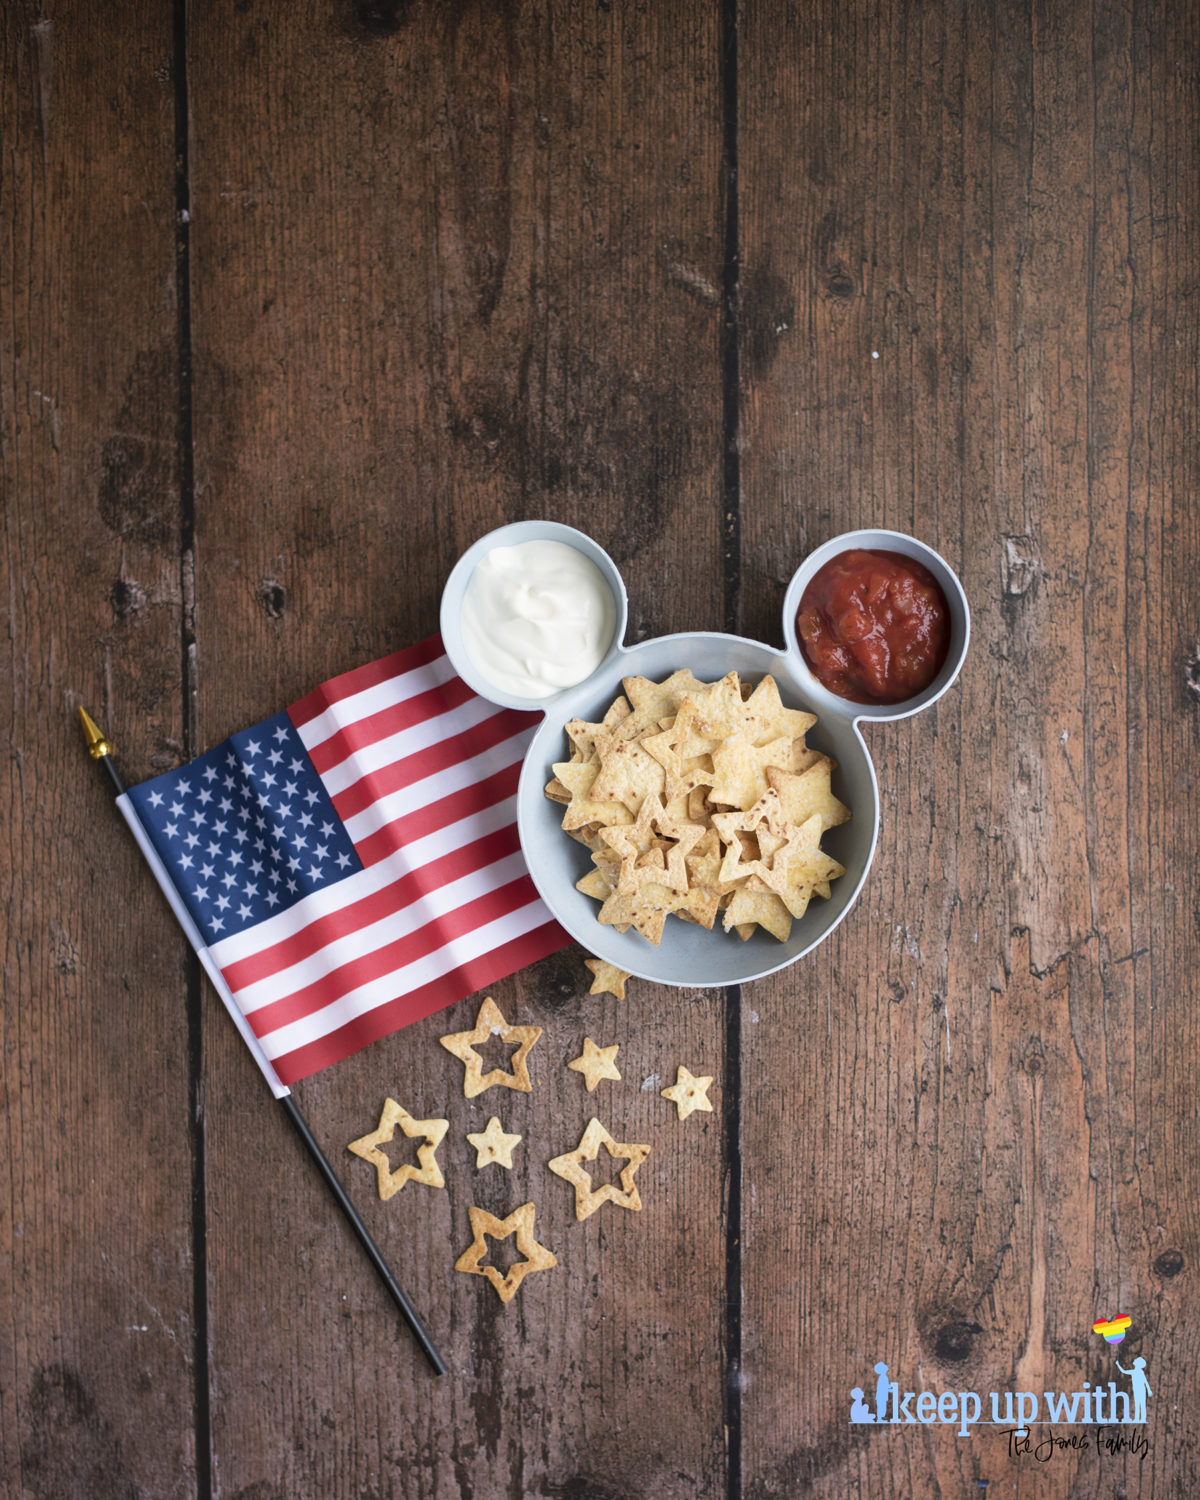 Image shows a blue bowl in the shape of Mickey Mouse suitable for chips 'n' dip. There is an American flag laid close to the bowl on the dark wooden table.  Inside the bowl is tomato salsa, soured cream, and star spangled nacho chips. Image by keep up with the jones family.